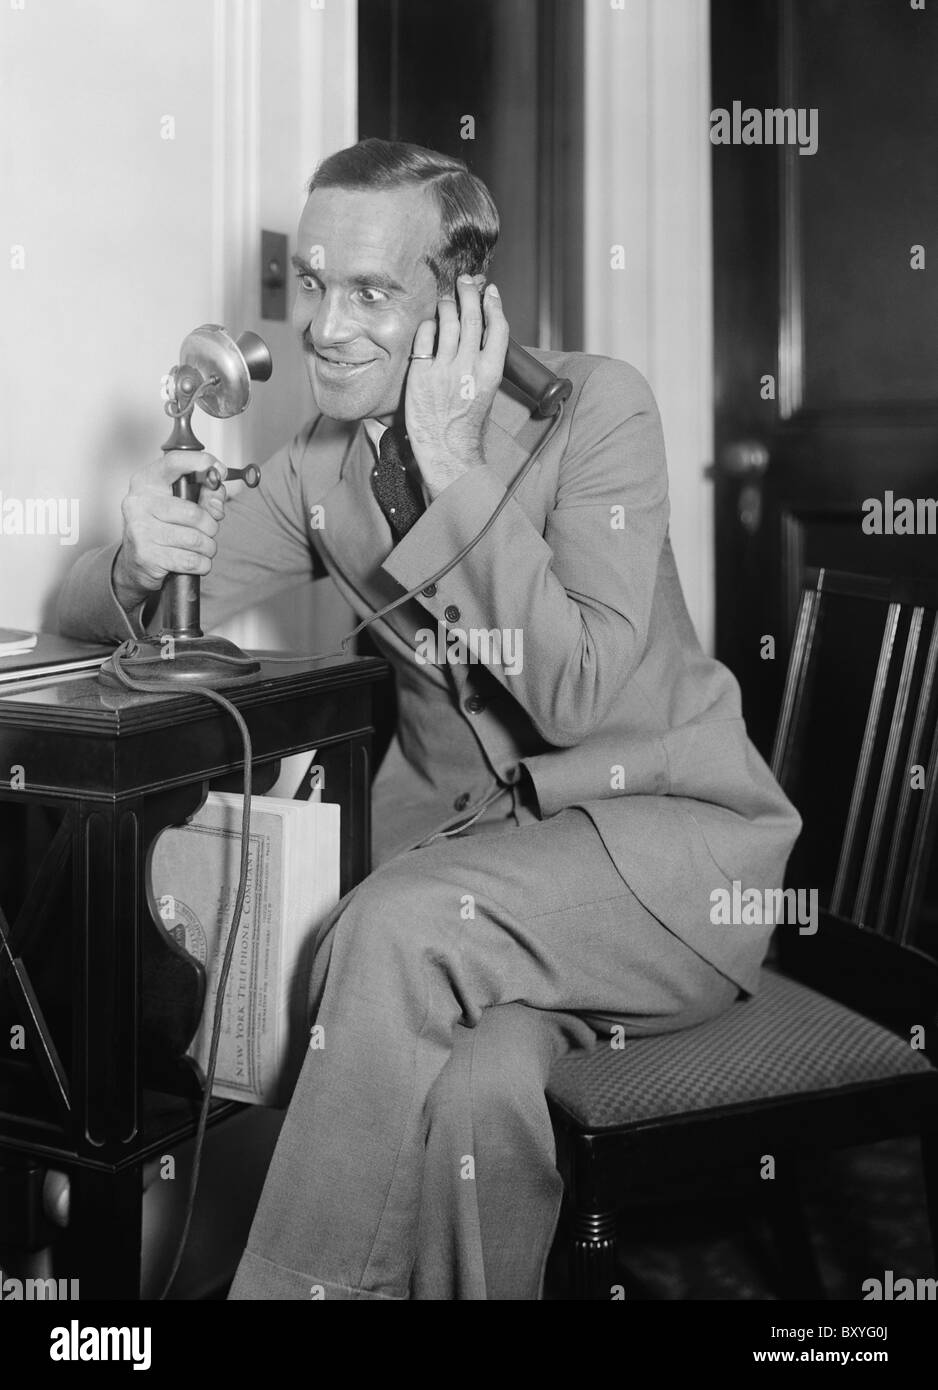 Vintage photo circa 1920s of Lithuanian-born American singer and actor Al Jolson (1886 - 1950). Stock Photo